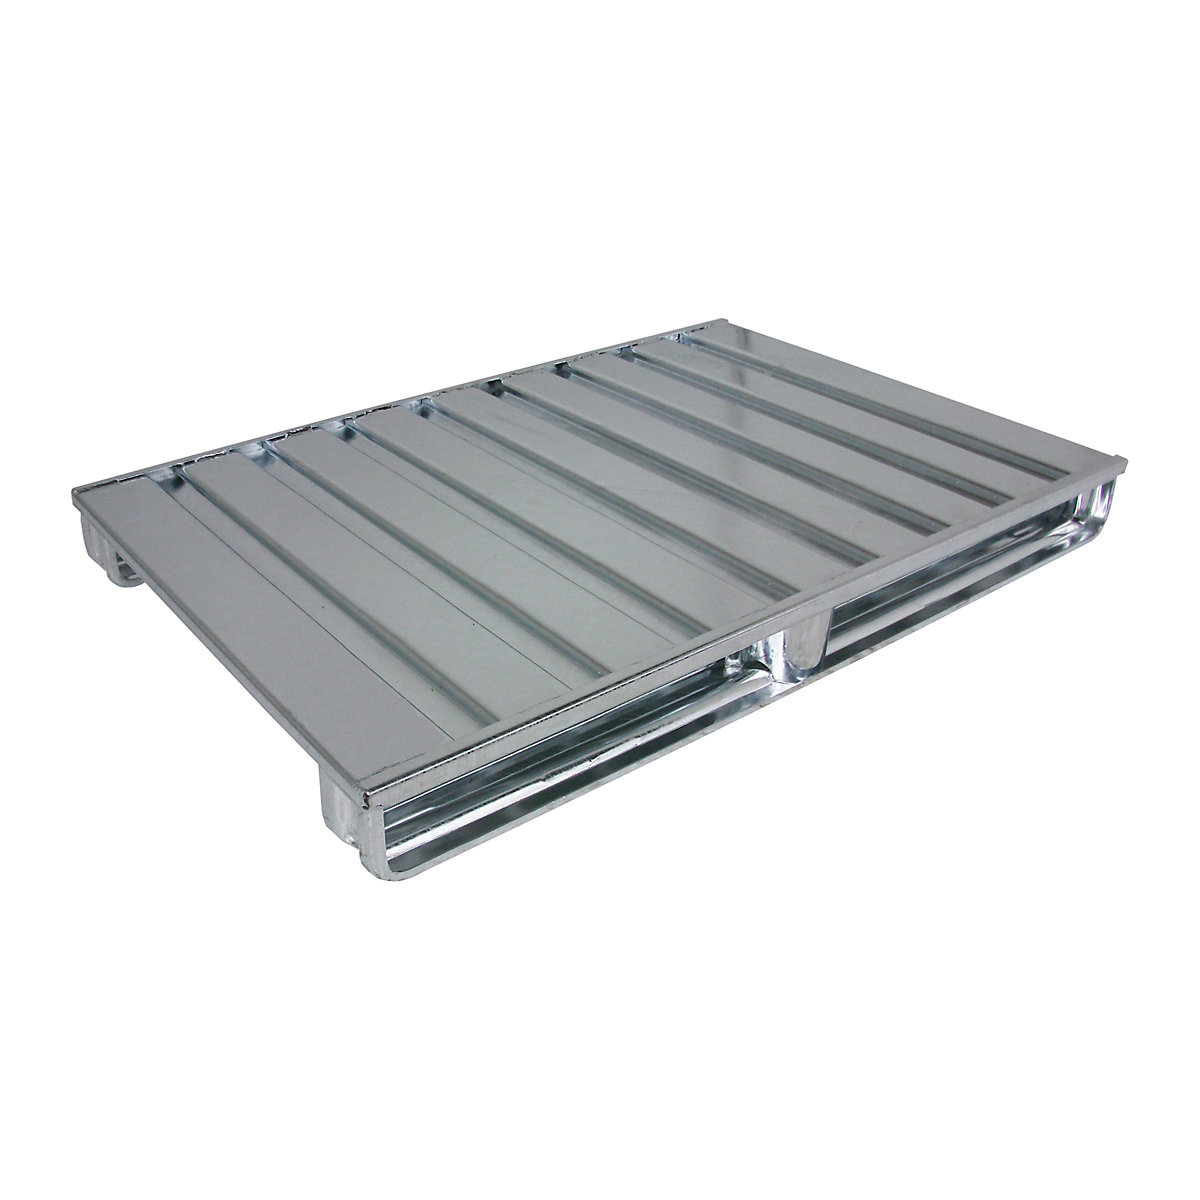 Flat steel pallet – Heson, LxW 1200 x 1000 mm, max. load 2000 kg, zinc plated, 10+ items-4